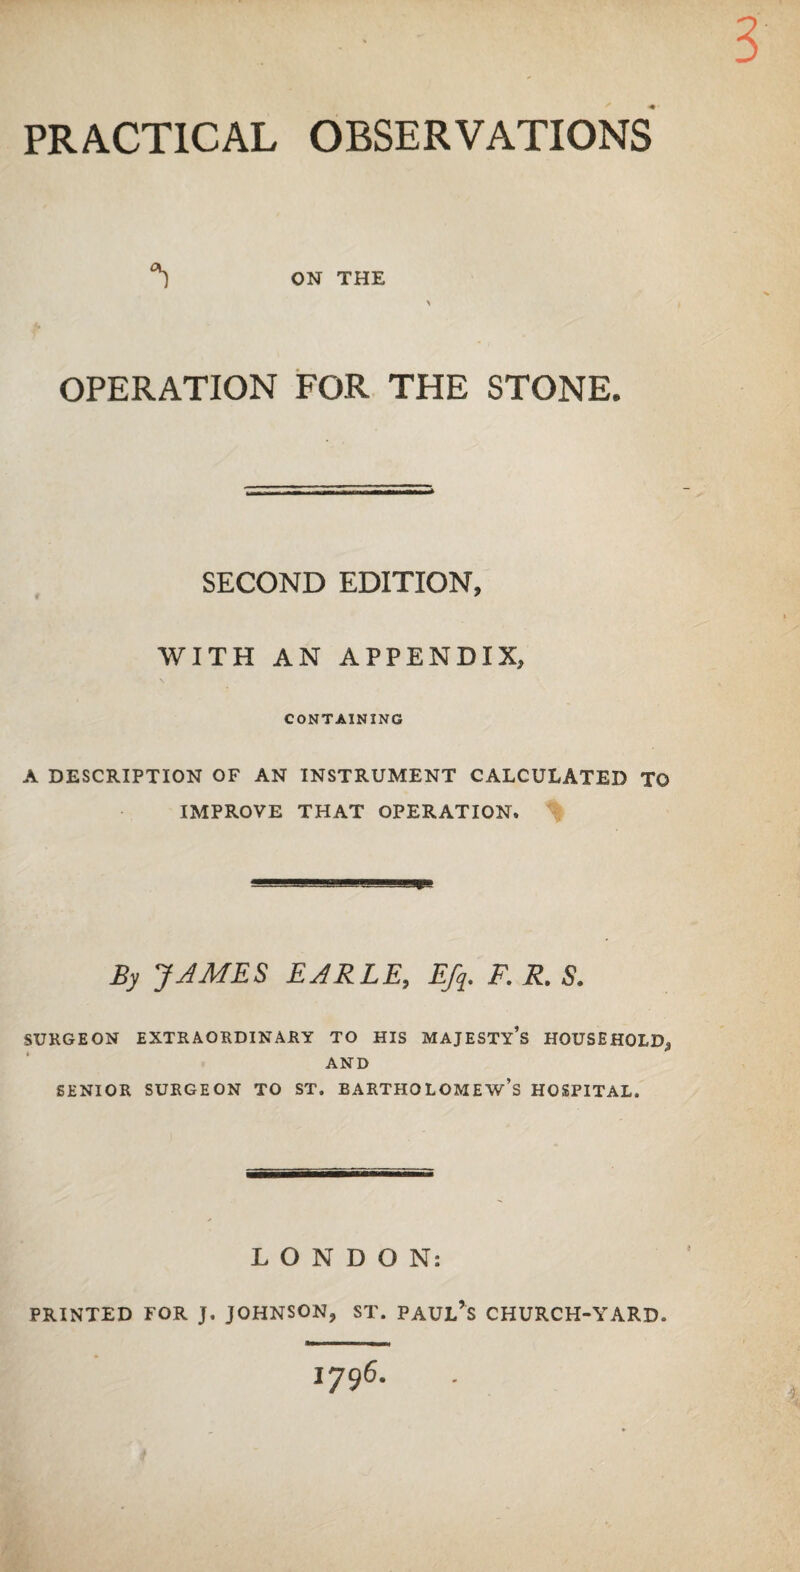 PRACTICAL OBSERVATIONS ON THE OPERATION FOR THE STONE. SECOND EDITION, WITH AN APPENDIX, CONTAINING A DESCRIPTION OF AN INSTRUMENT CALCULATED TO IMPROVE THAT OPERATION, By JAMES EARLE, Efy. F. R. S. SURGEON EXTRAORDINARY TO HIS MAJESTY’S HOUSEHOLD, AND SENIOR SURGEON TO ST. BARTHOLOMEW’S HOSPITAL. LONDON: PRINTED FOR J. JOHNSON, ST. PAULAS CHURCH-YARD. 1796